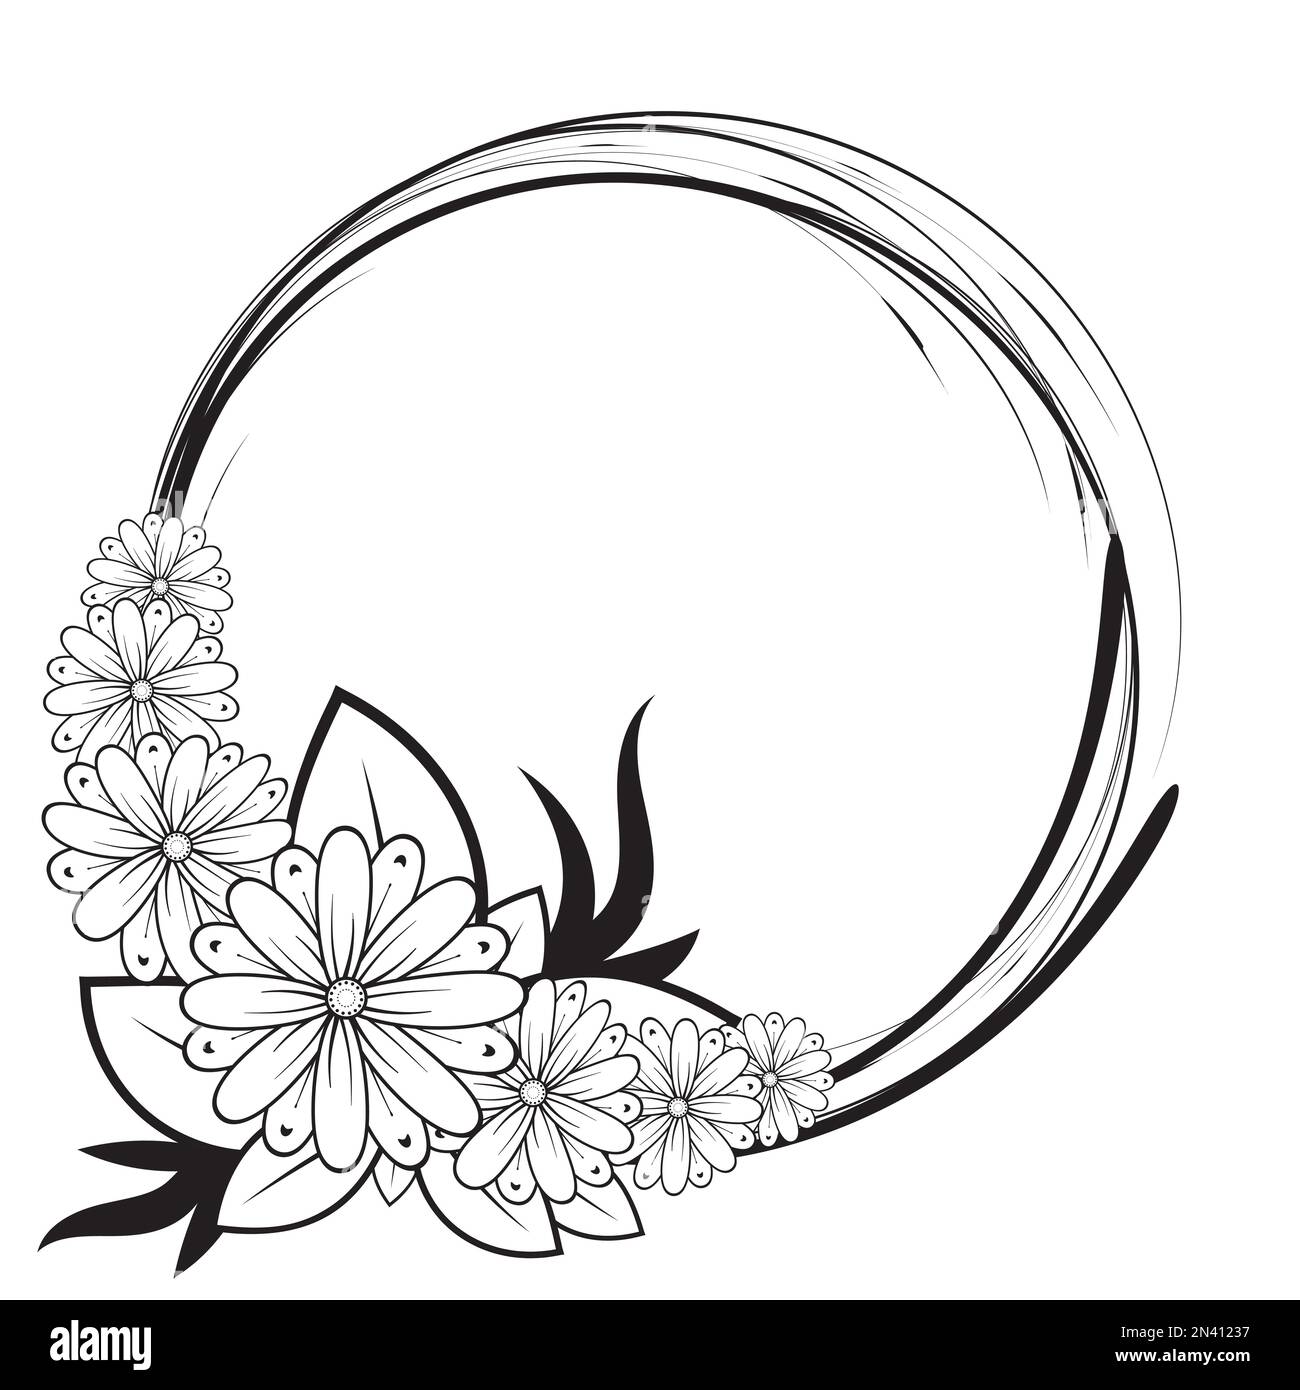 Ornate frame clip art Black and White Stock Photos & Images - Alamy